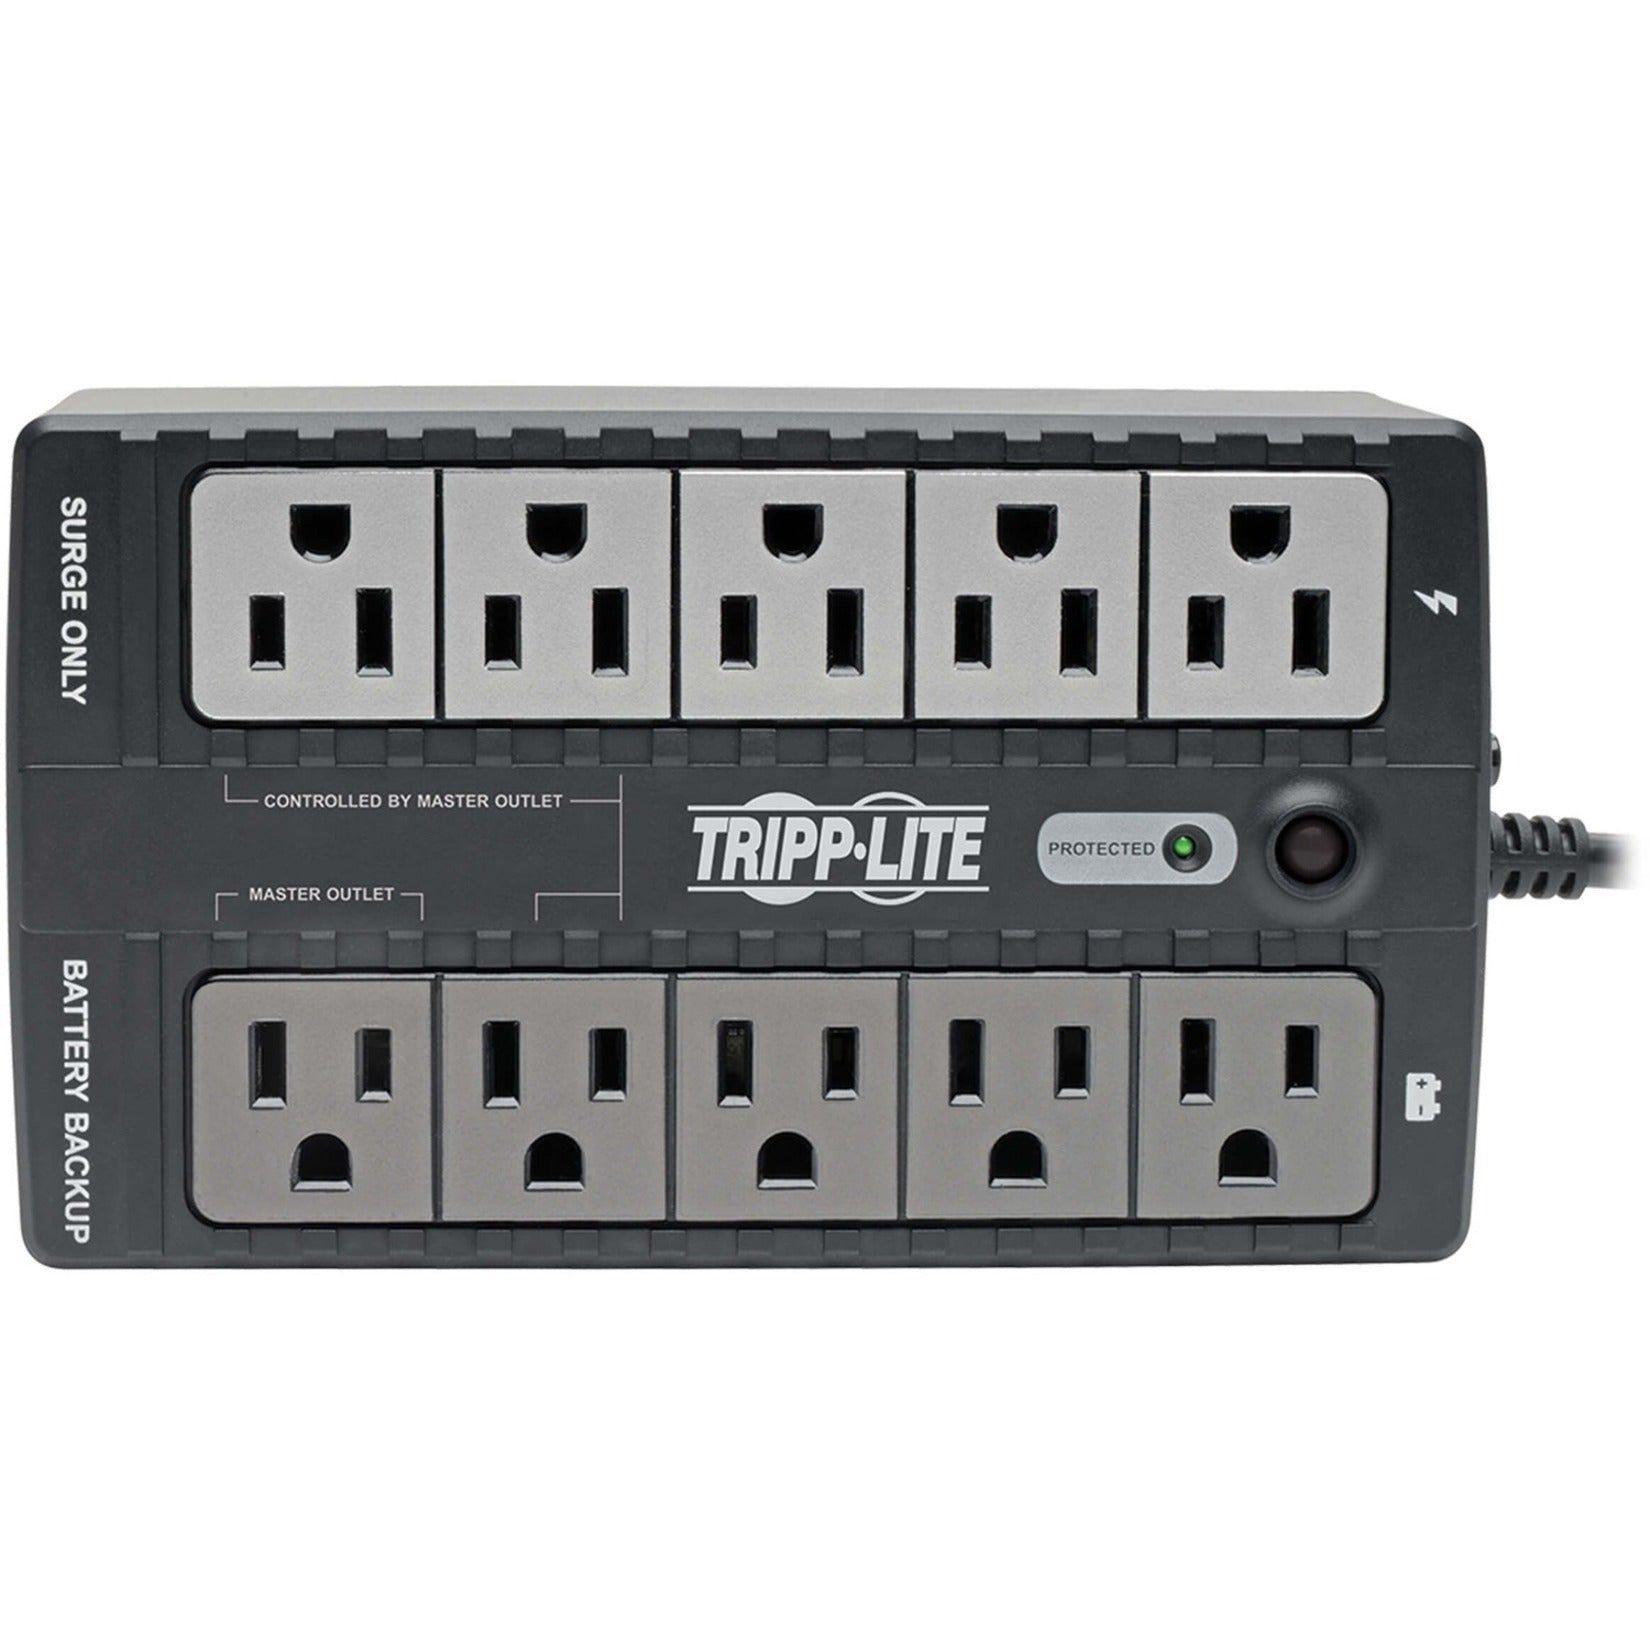 Tripp Lite ECO650UPSM Eco 650VA Energy-saving Standby 120V UPS with USB Port and Muted Alarm, 3 Year Warranty, Overload and Power Failure Alarm